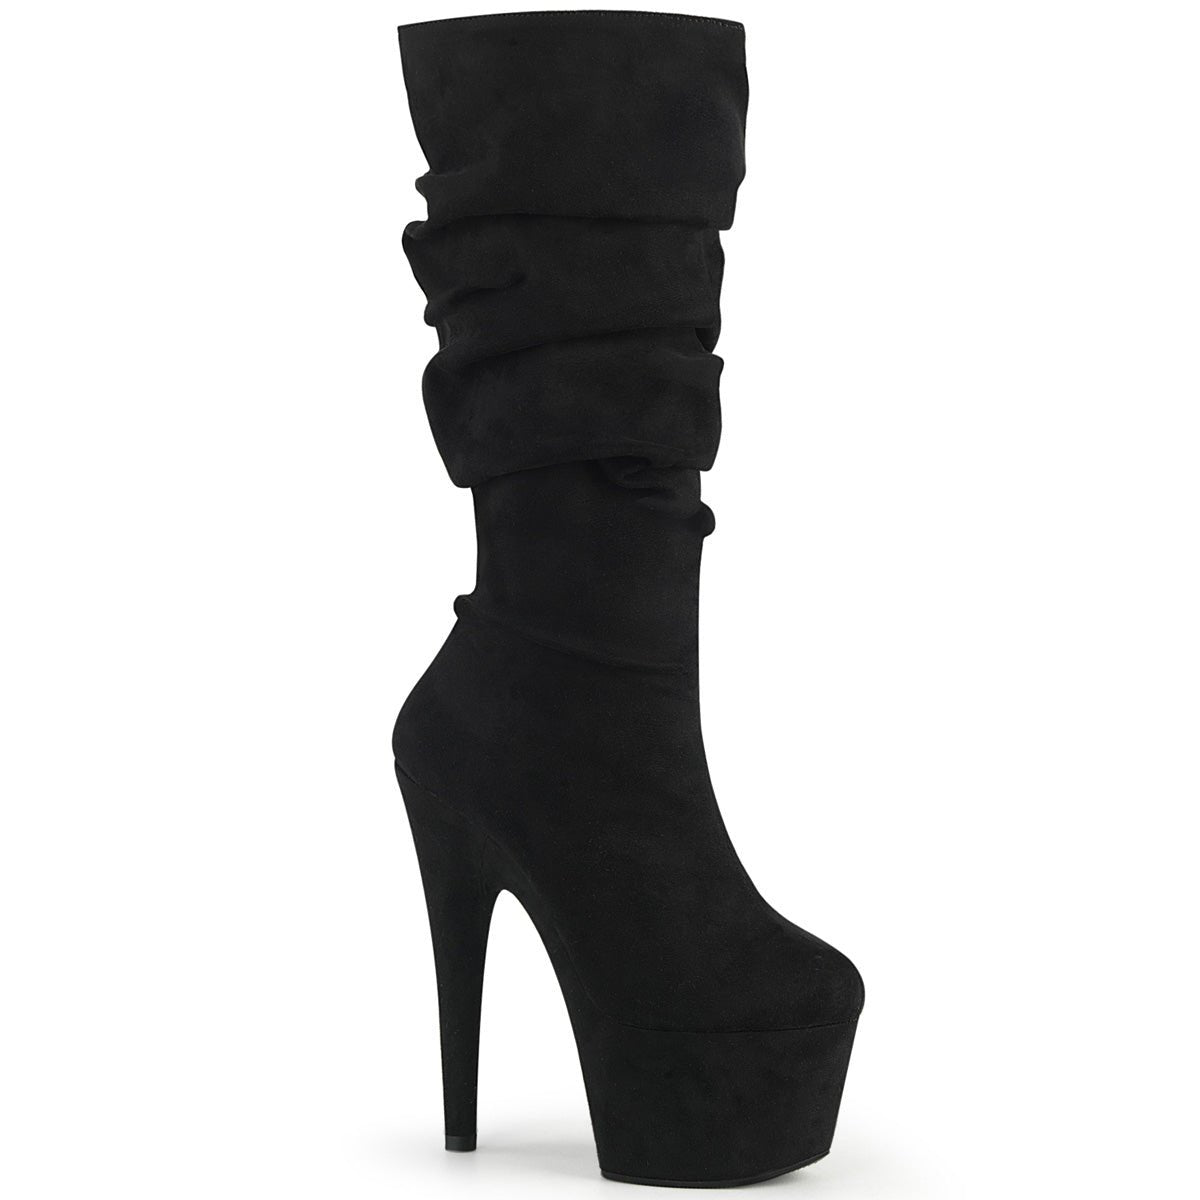 Clearance Pleaser Adore 3061 Black Size 3UK/6USA